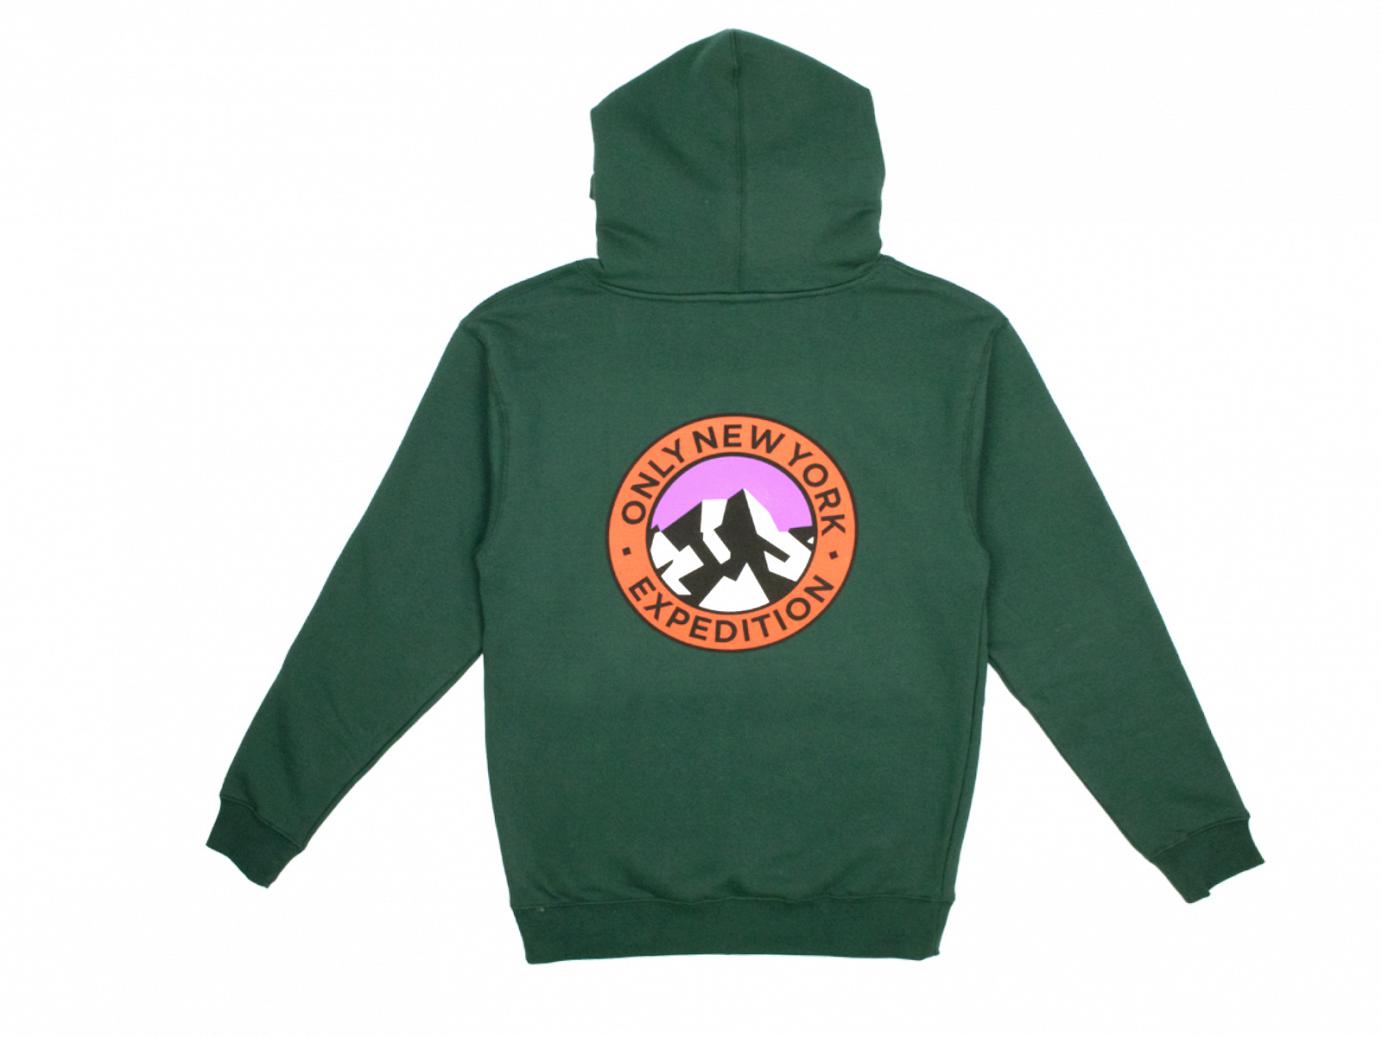 expedition hoodie